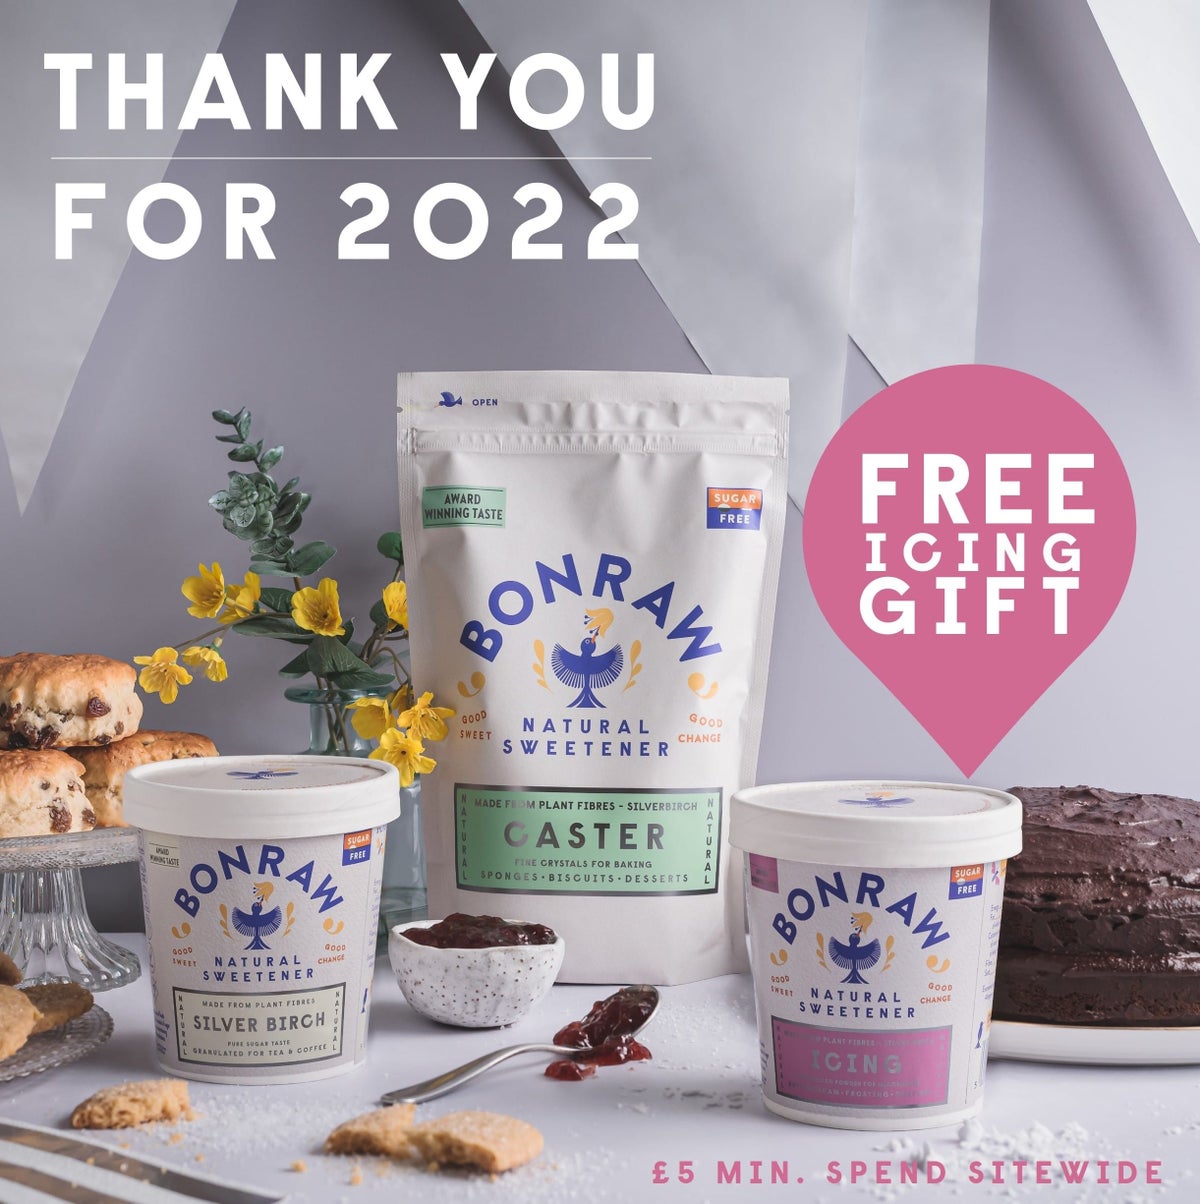 Thank you for 2022. Free Icing gift. £5 min spend sitewide.